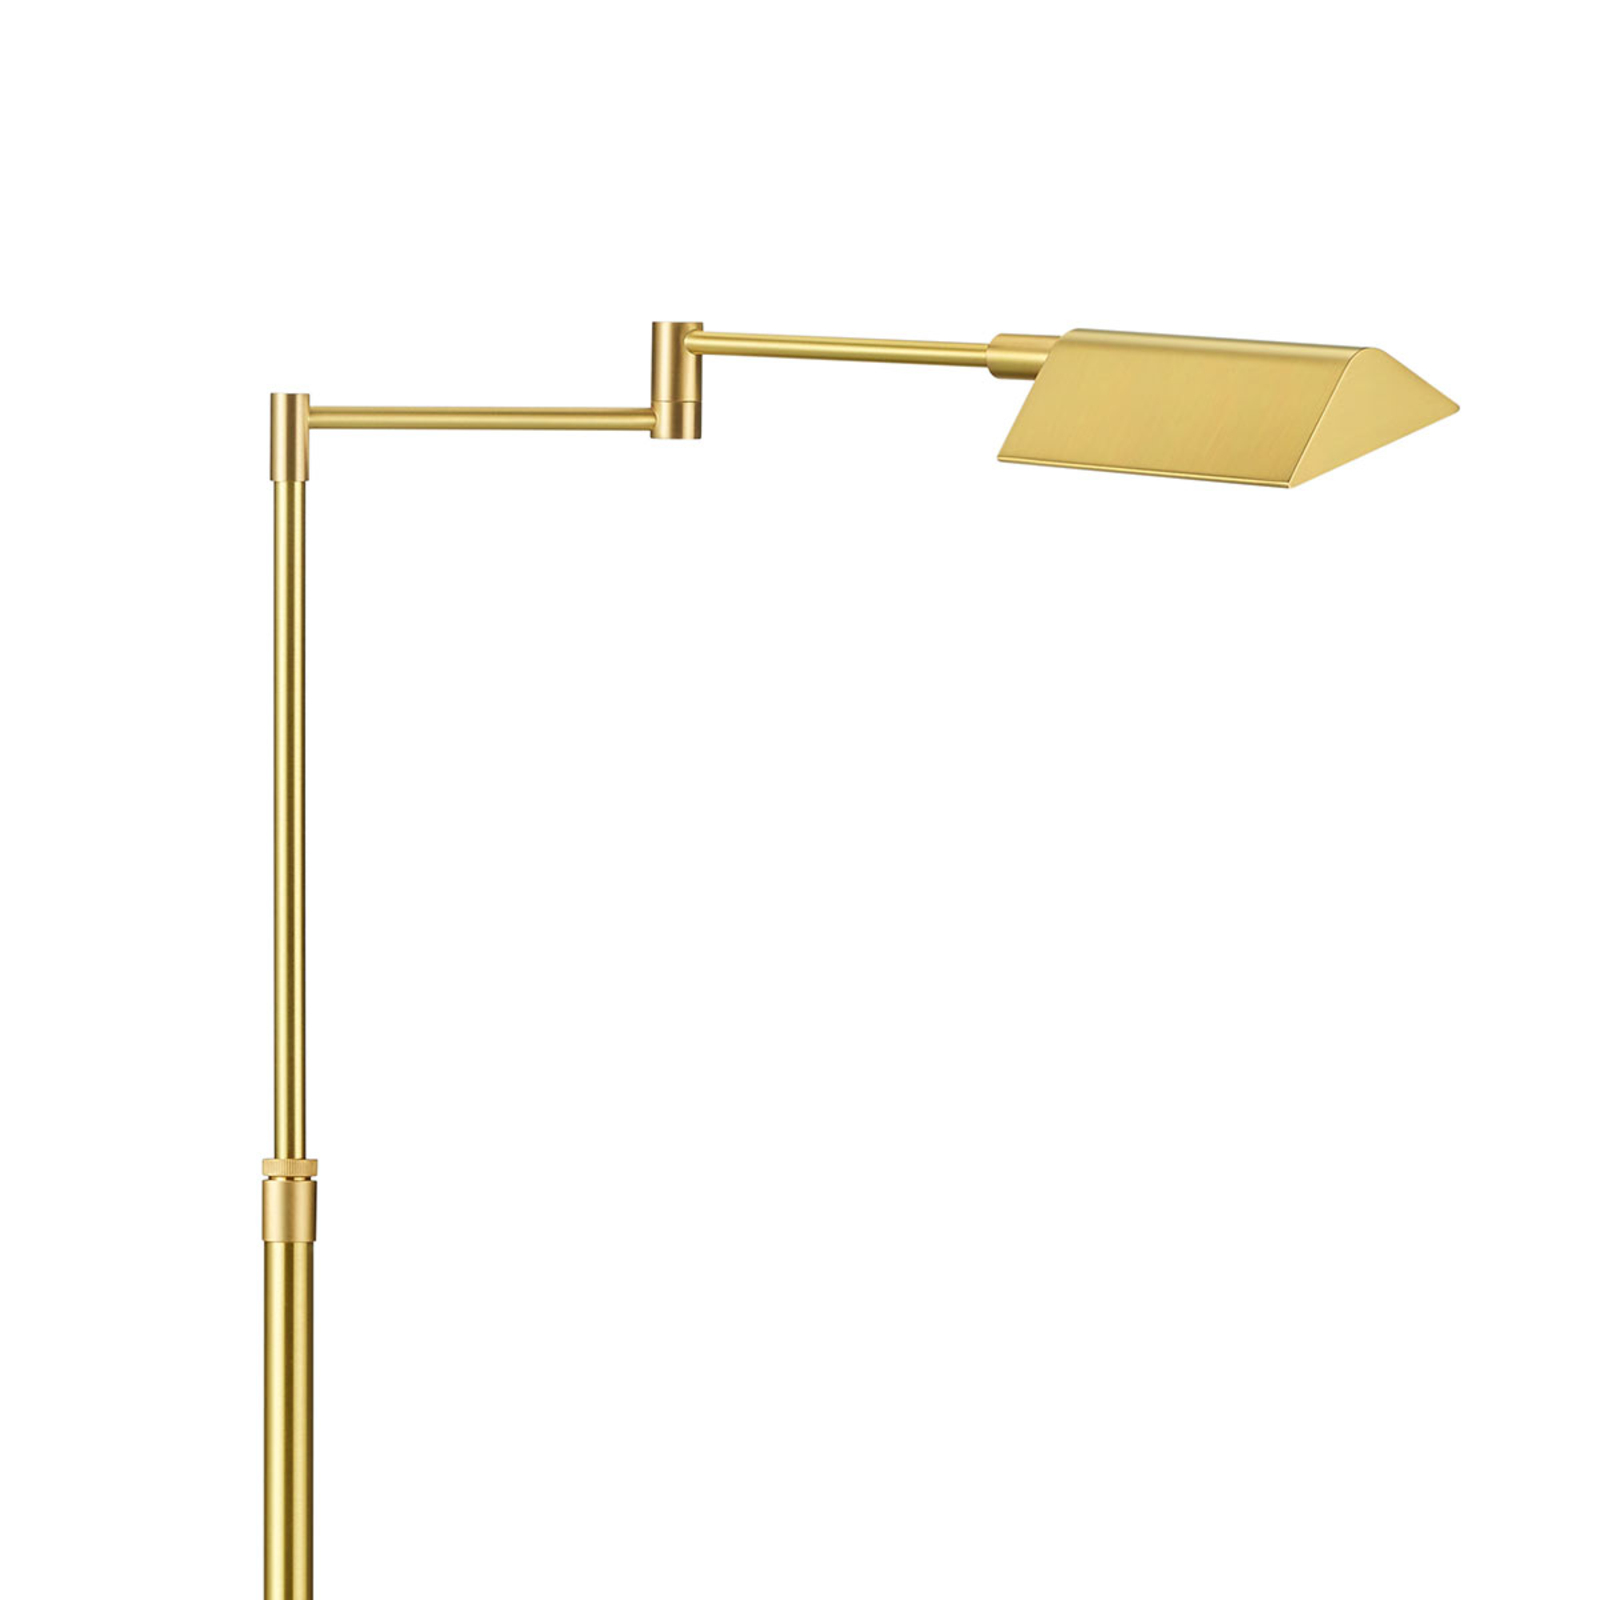 With gesture control - Dream LED floor lamp, brass